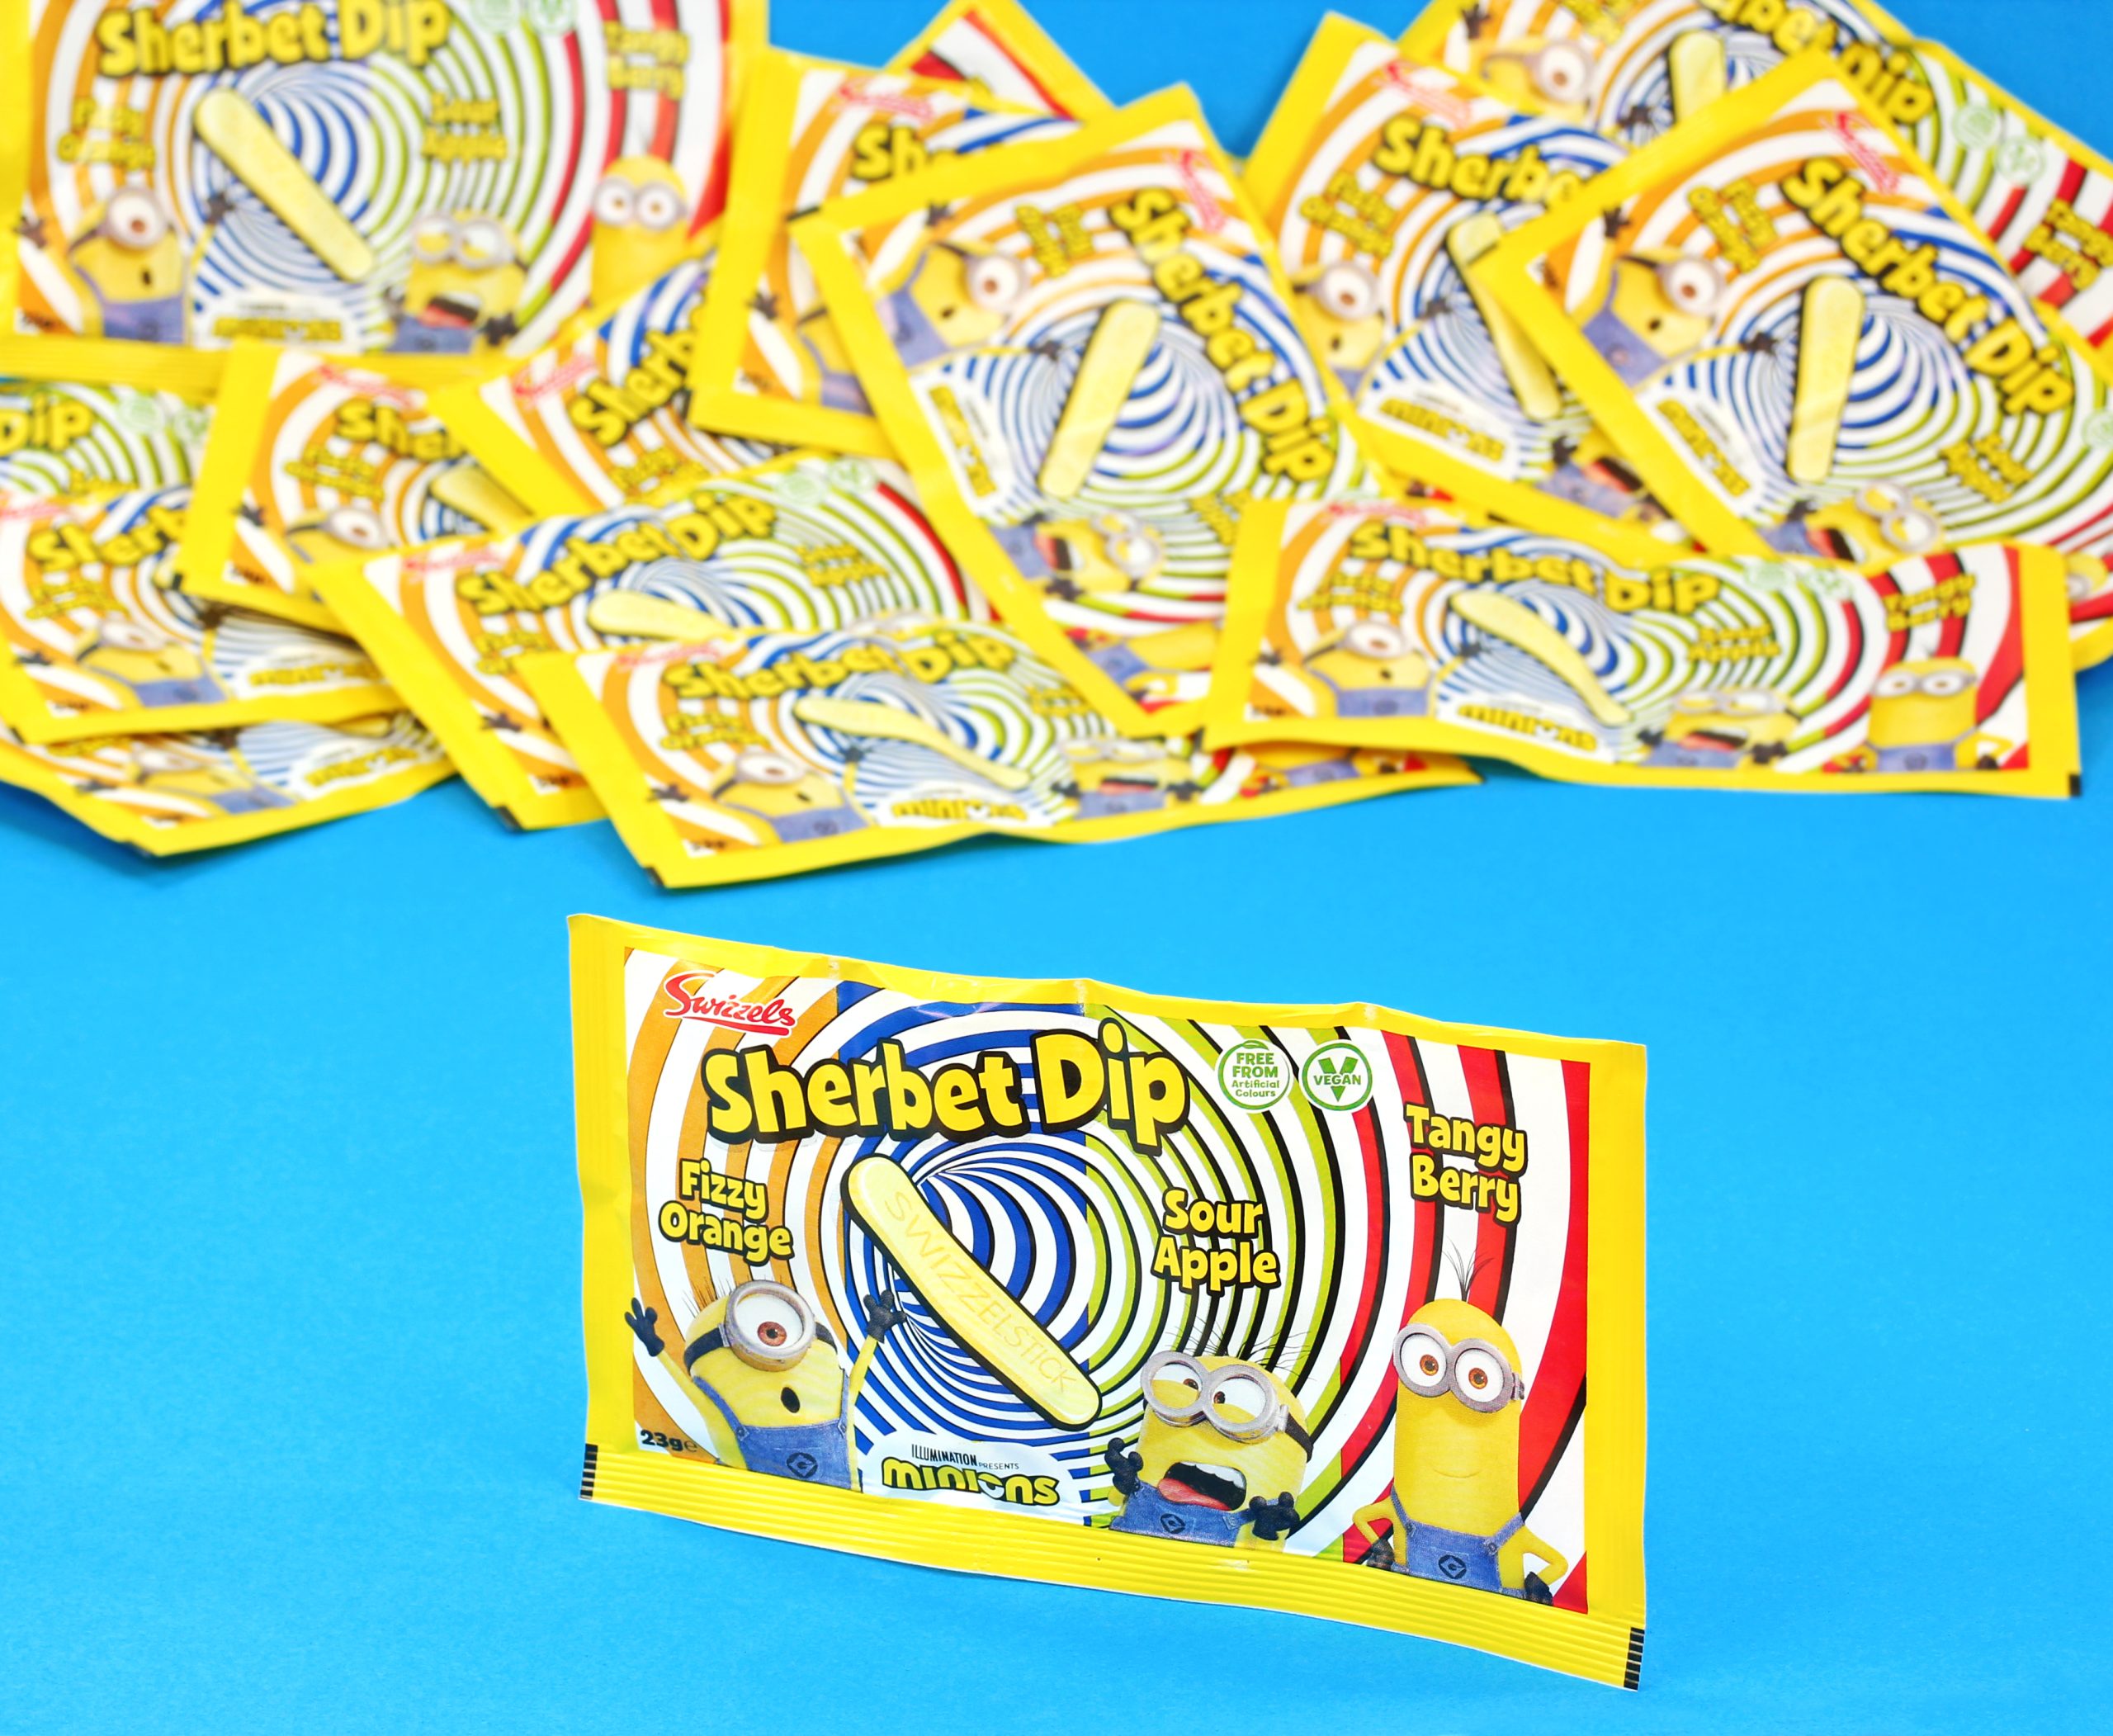 Swizzels launches new range of Sherbet Dips inspired by Illumination’s beloved Minions